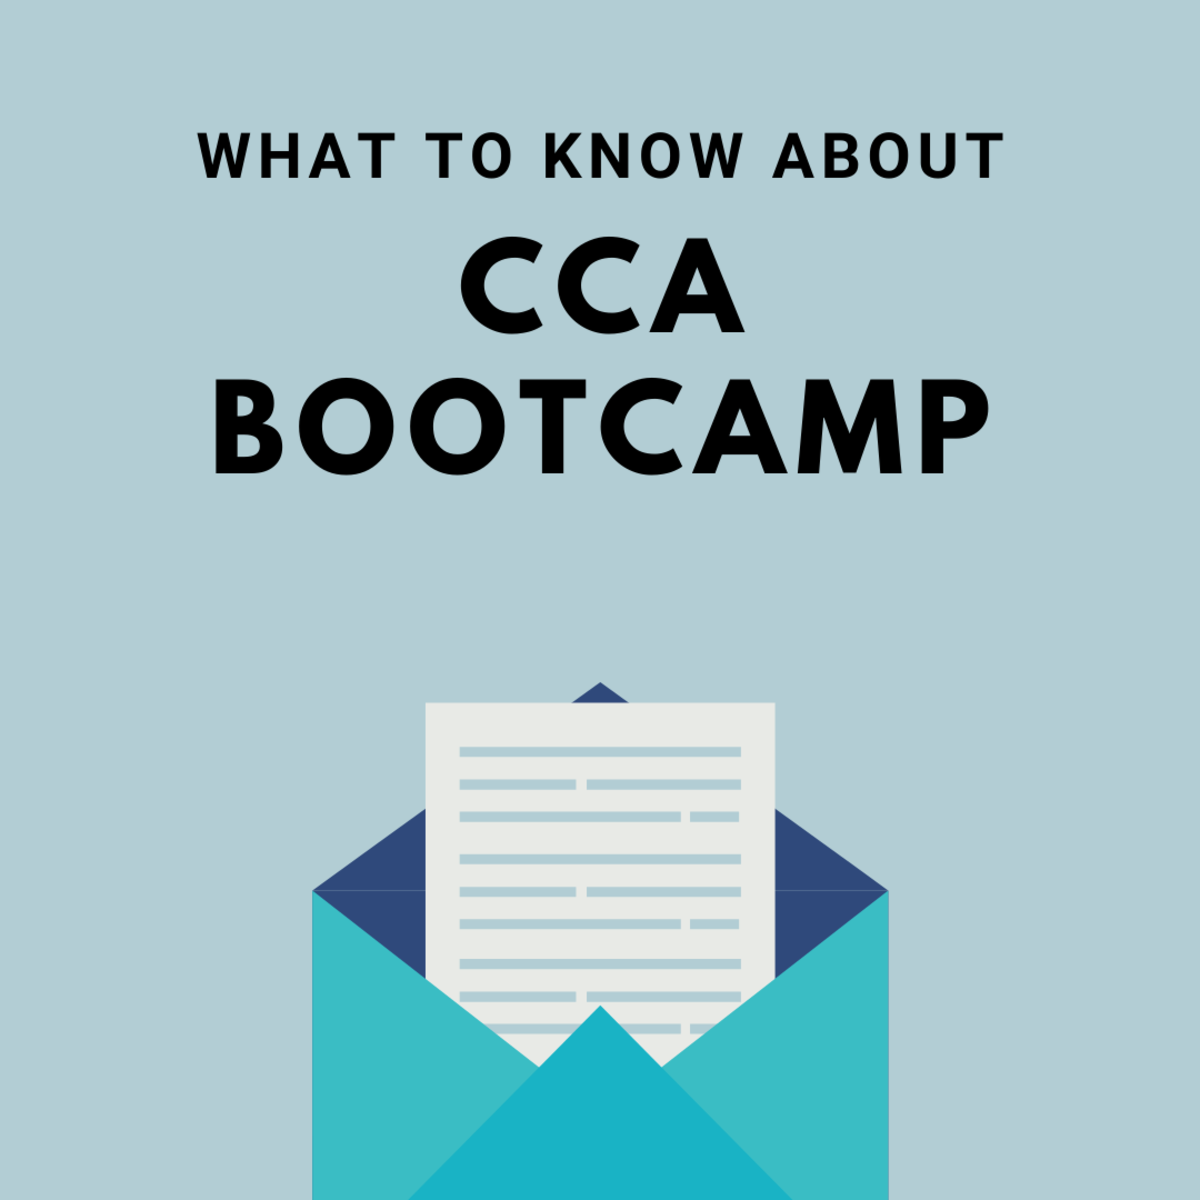 CCA Bootcamp: What to Expect During Your Brief but Brutal Letter Carrier Initiation